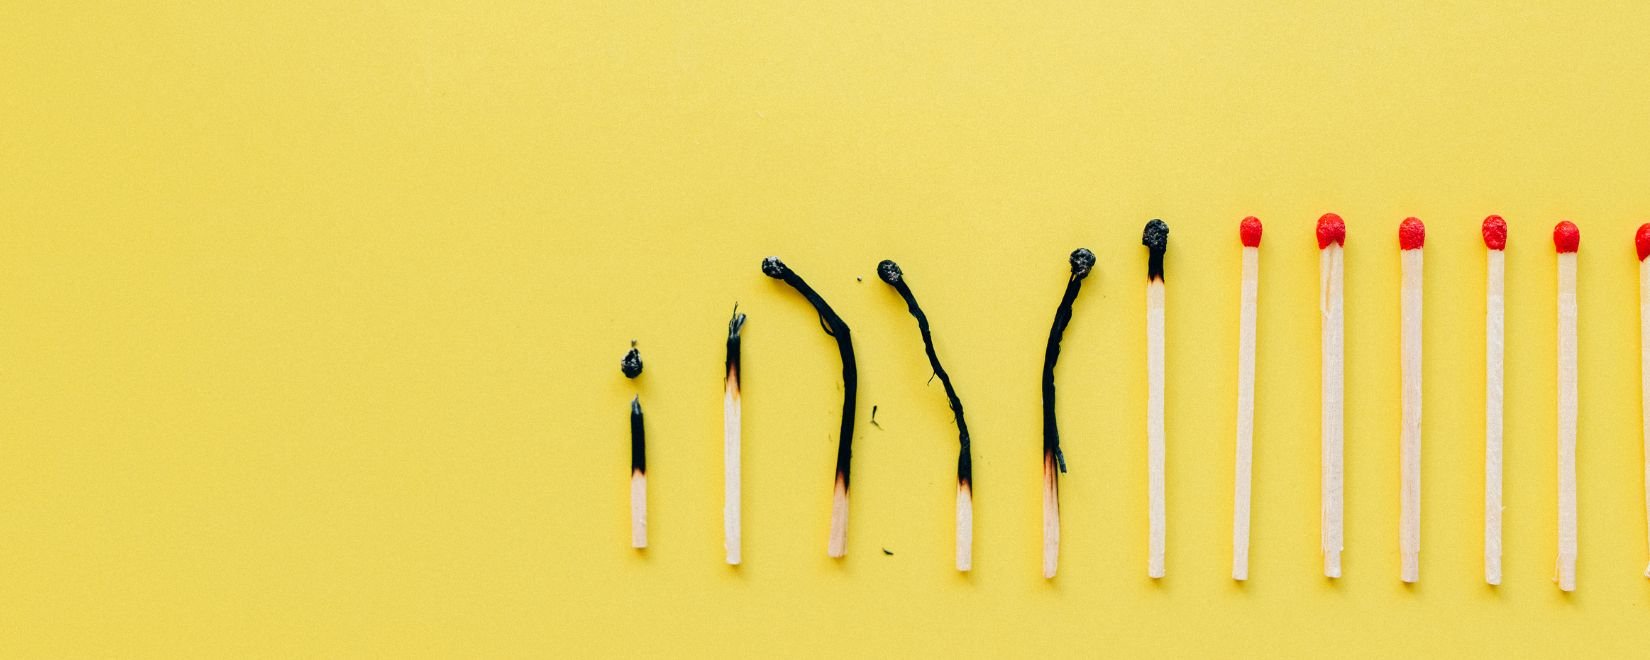 A line of matches, some burnt and some unburnt on a yellow background.